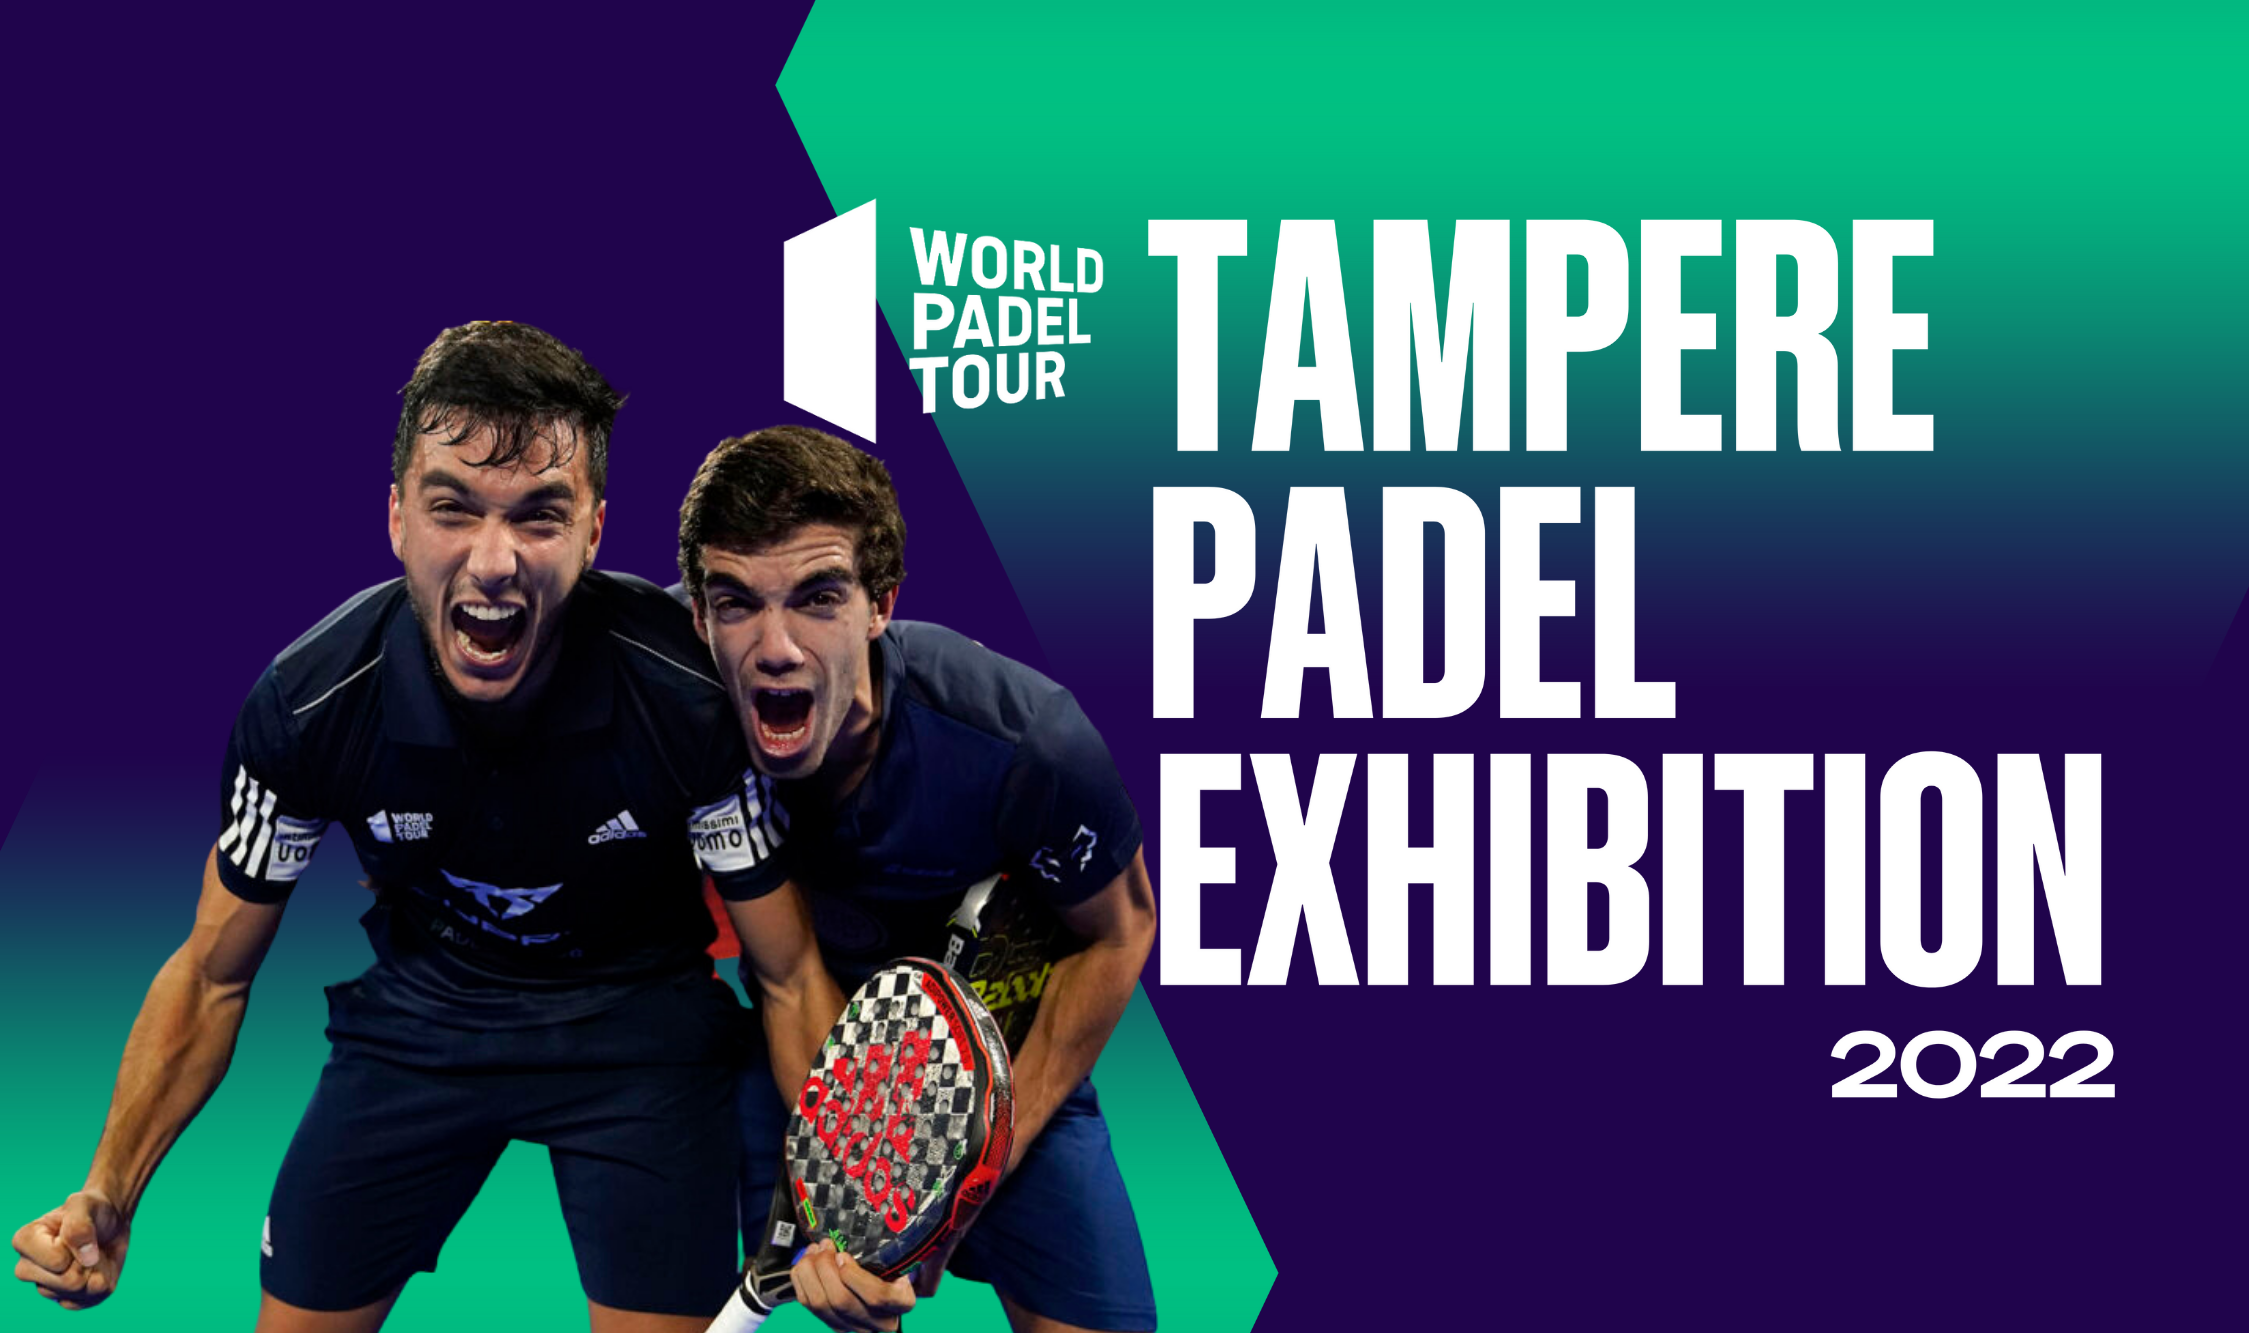 WPT - TAMPERE PADEL EXHIBITION - THURSDAY - VIP GOLD BOX